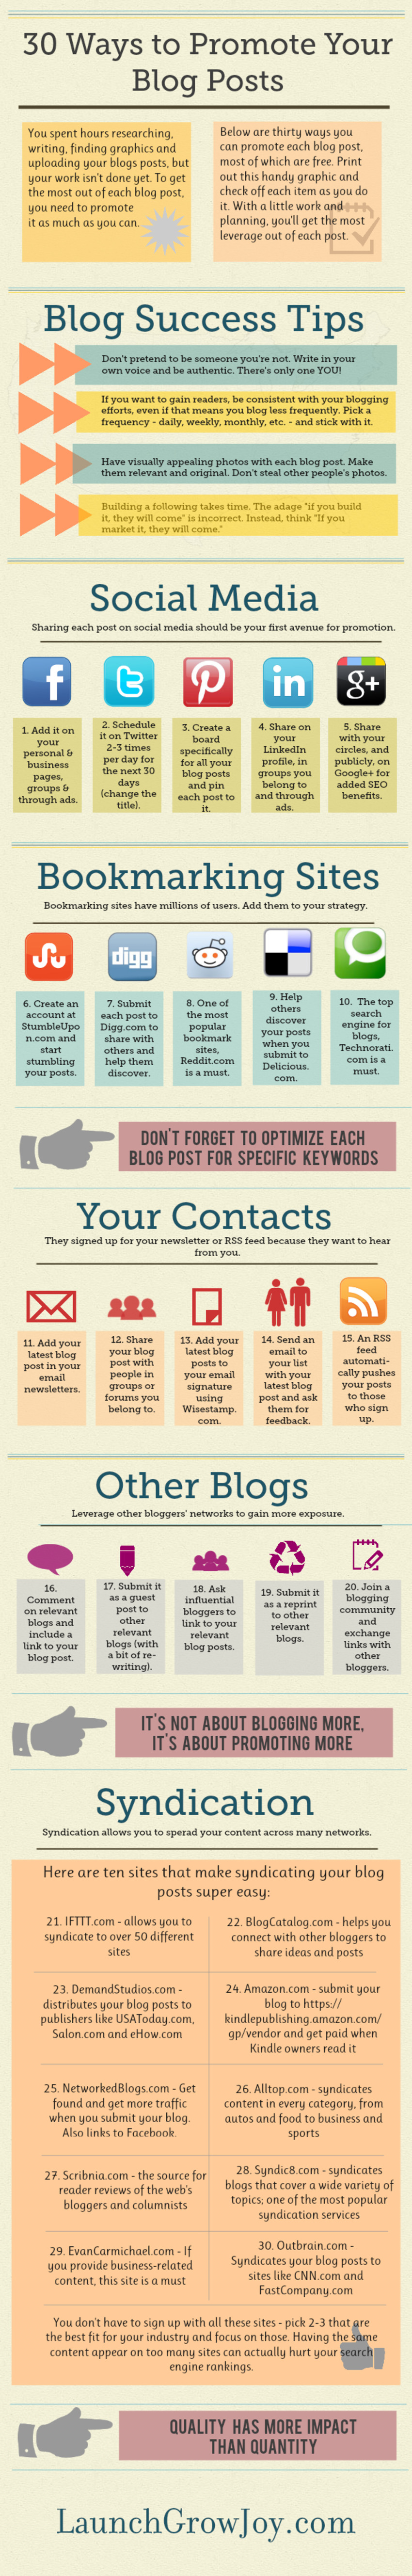 Infographic: How To Promote Your Blog Posts | The MarTech Digest | Scoop.it